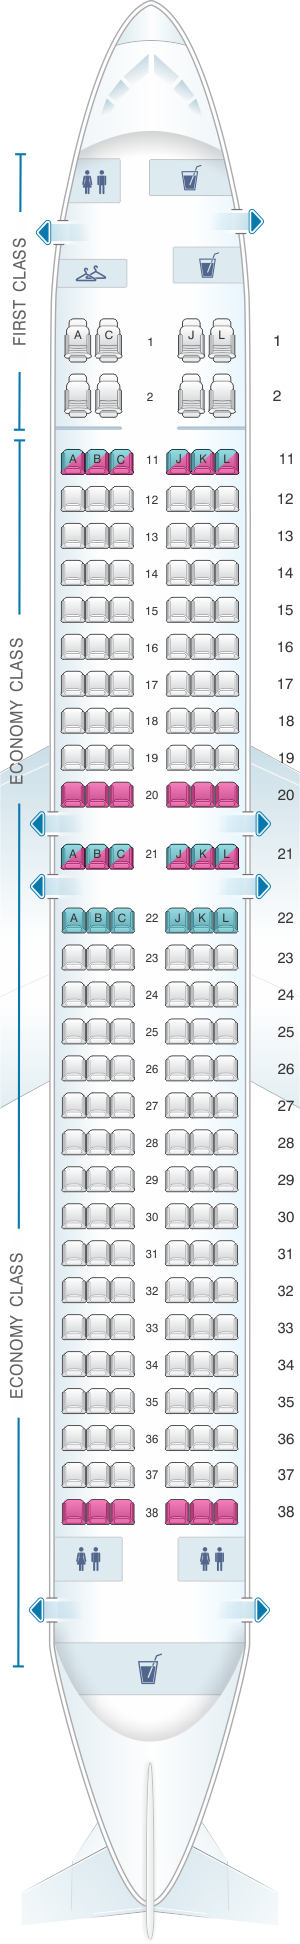 Seat map for Air China Boeing B737 800 (176PAX)